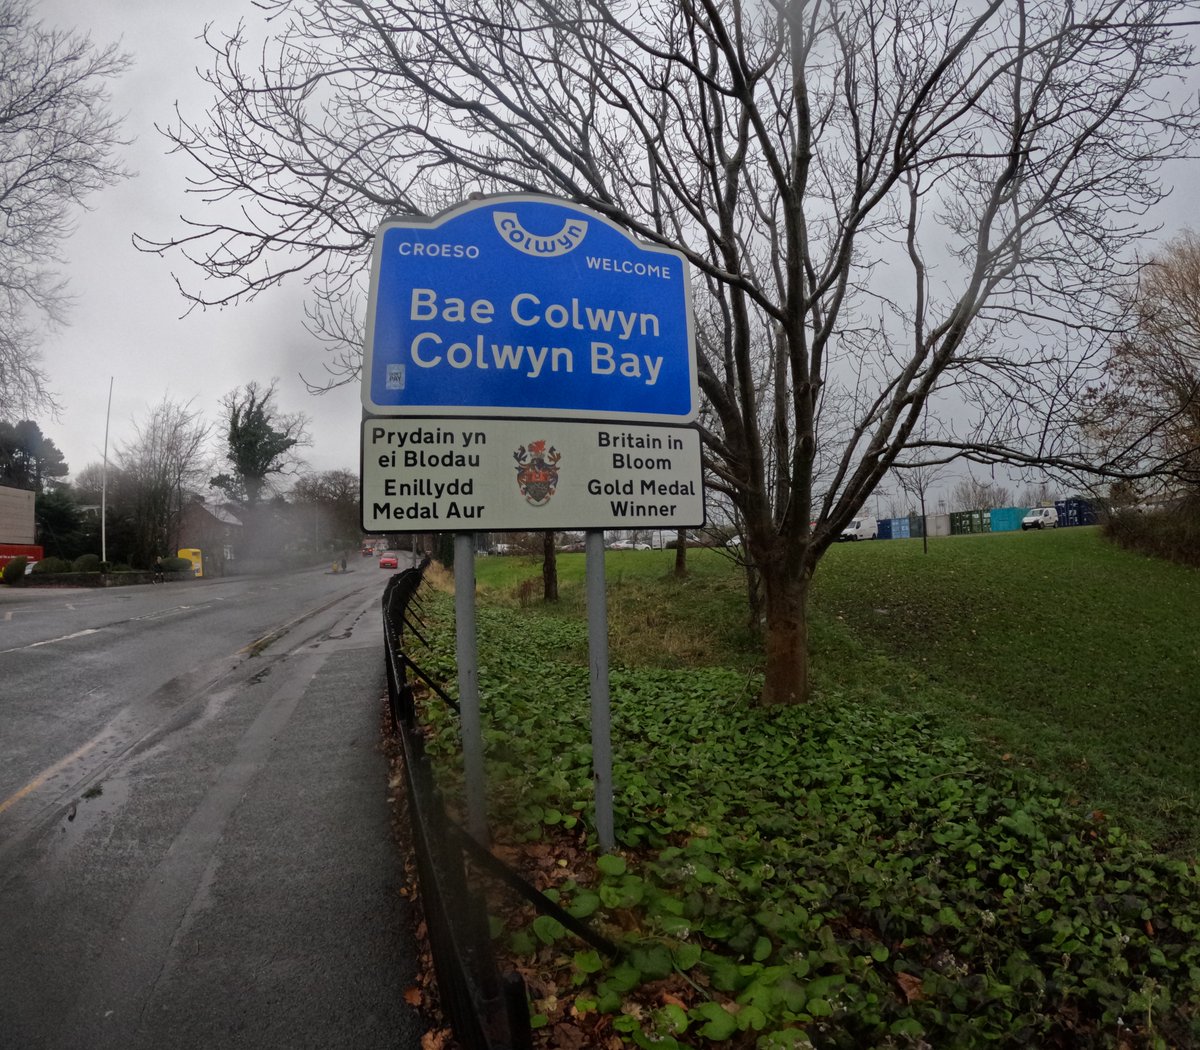 #colwynbay #northwales

The Welcome to Colwyn Bay sign in December 2023!